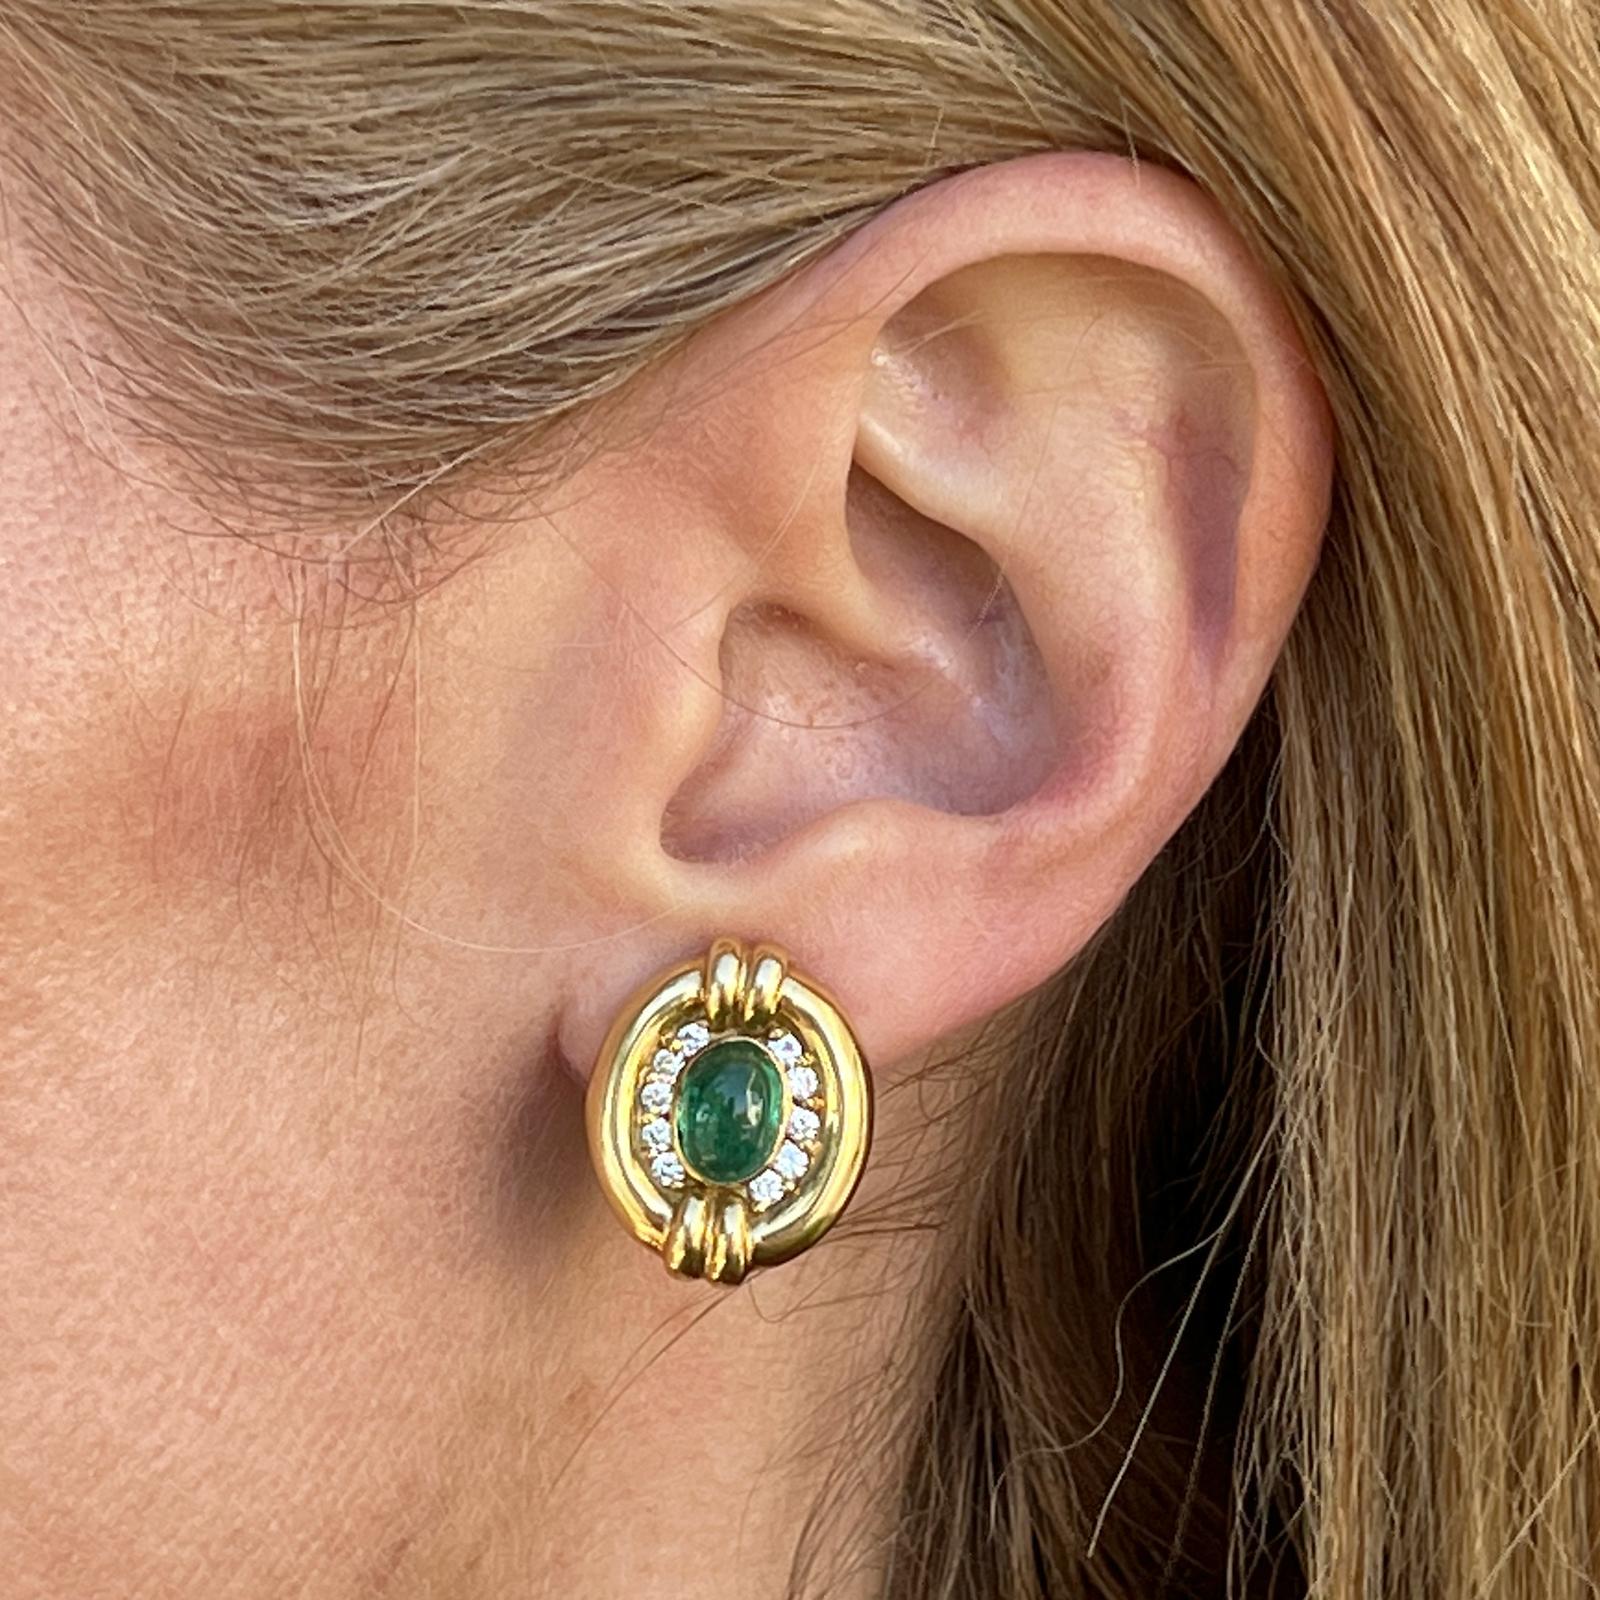 Emerald and diamond earrings crafted in 18 karat yellow gold. The earrings feature 2 cabochon natural emerald gemstones weighing approximately 3.00 CTW and 20 round brilliant cut diamonds weighing .50 CTW. The diamonds are graded G-H color and VS